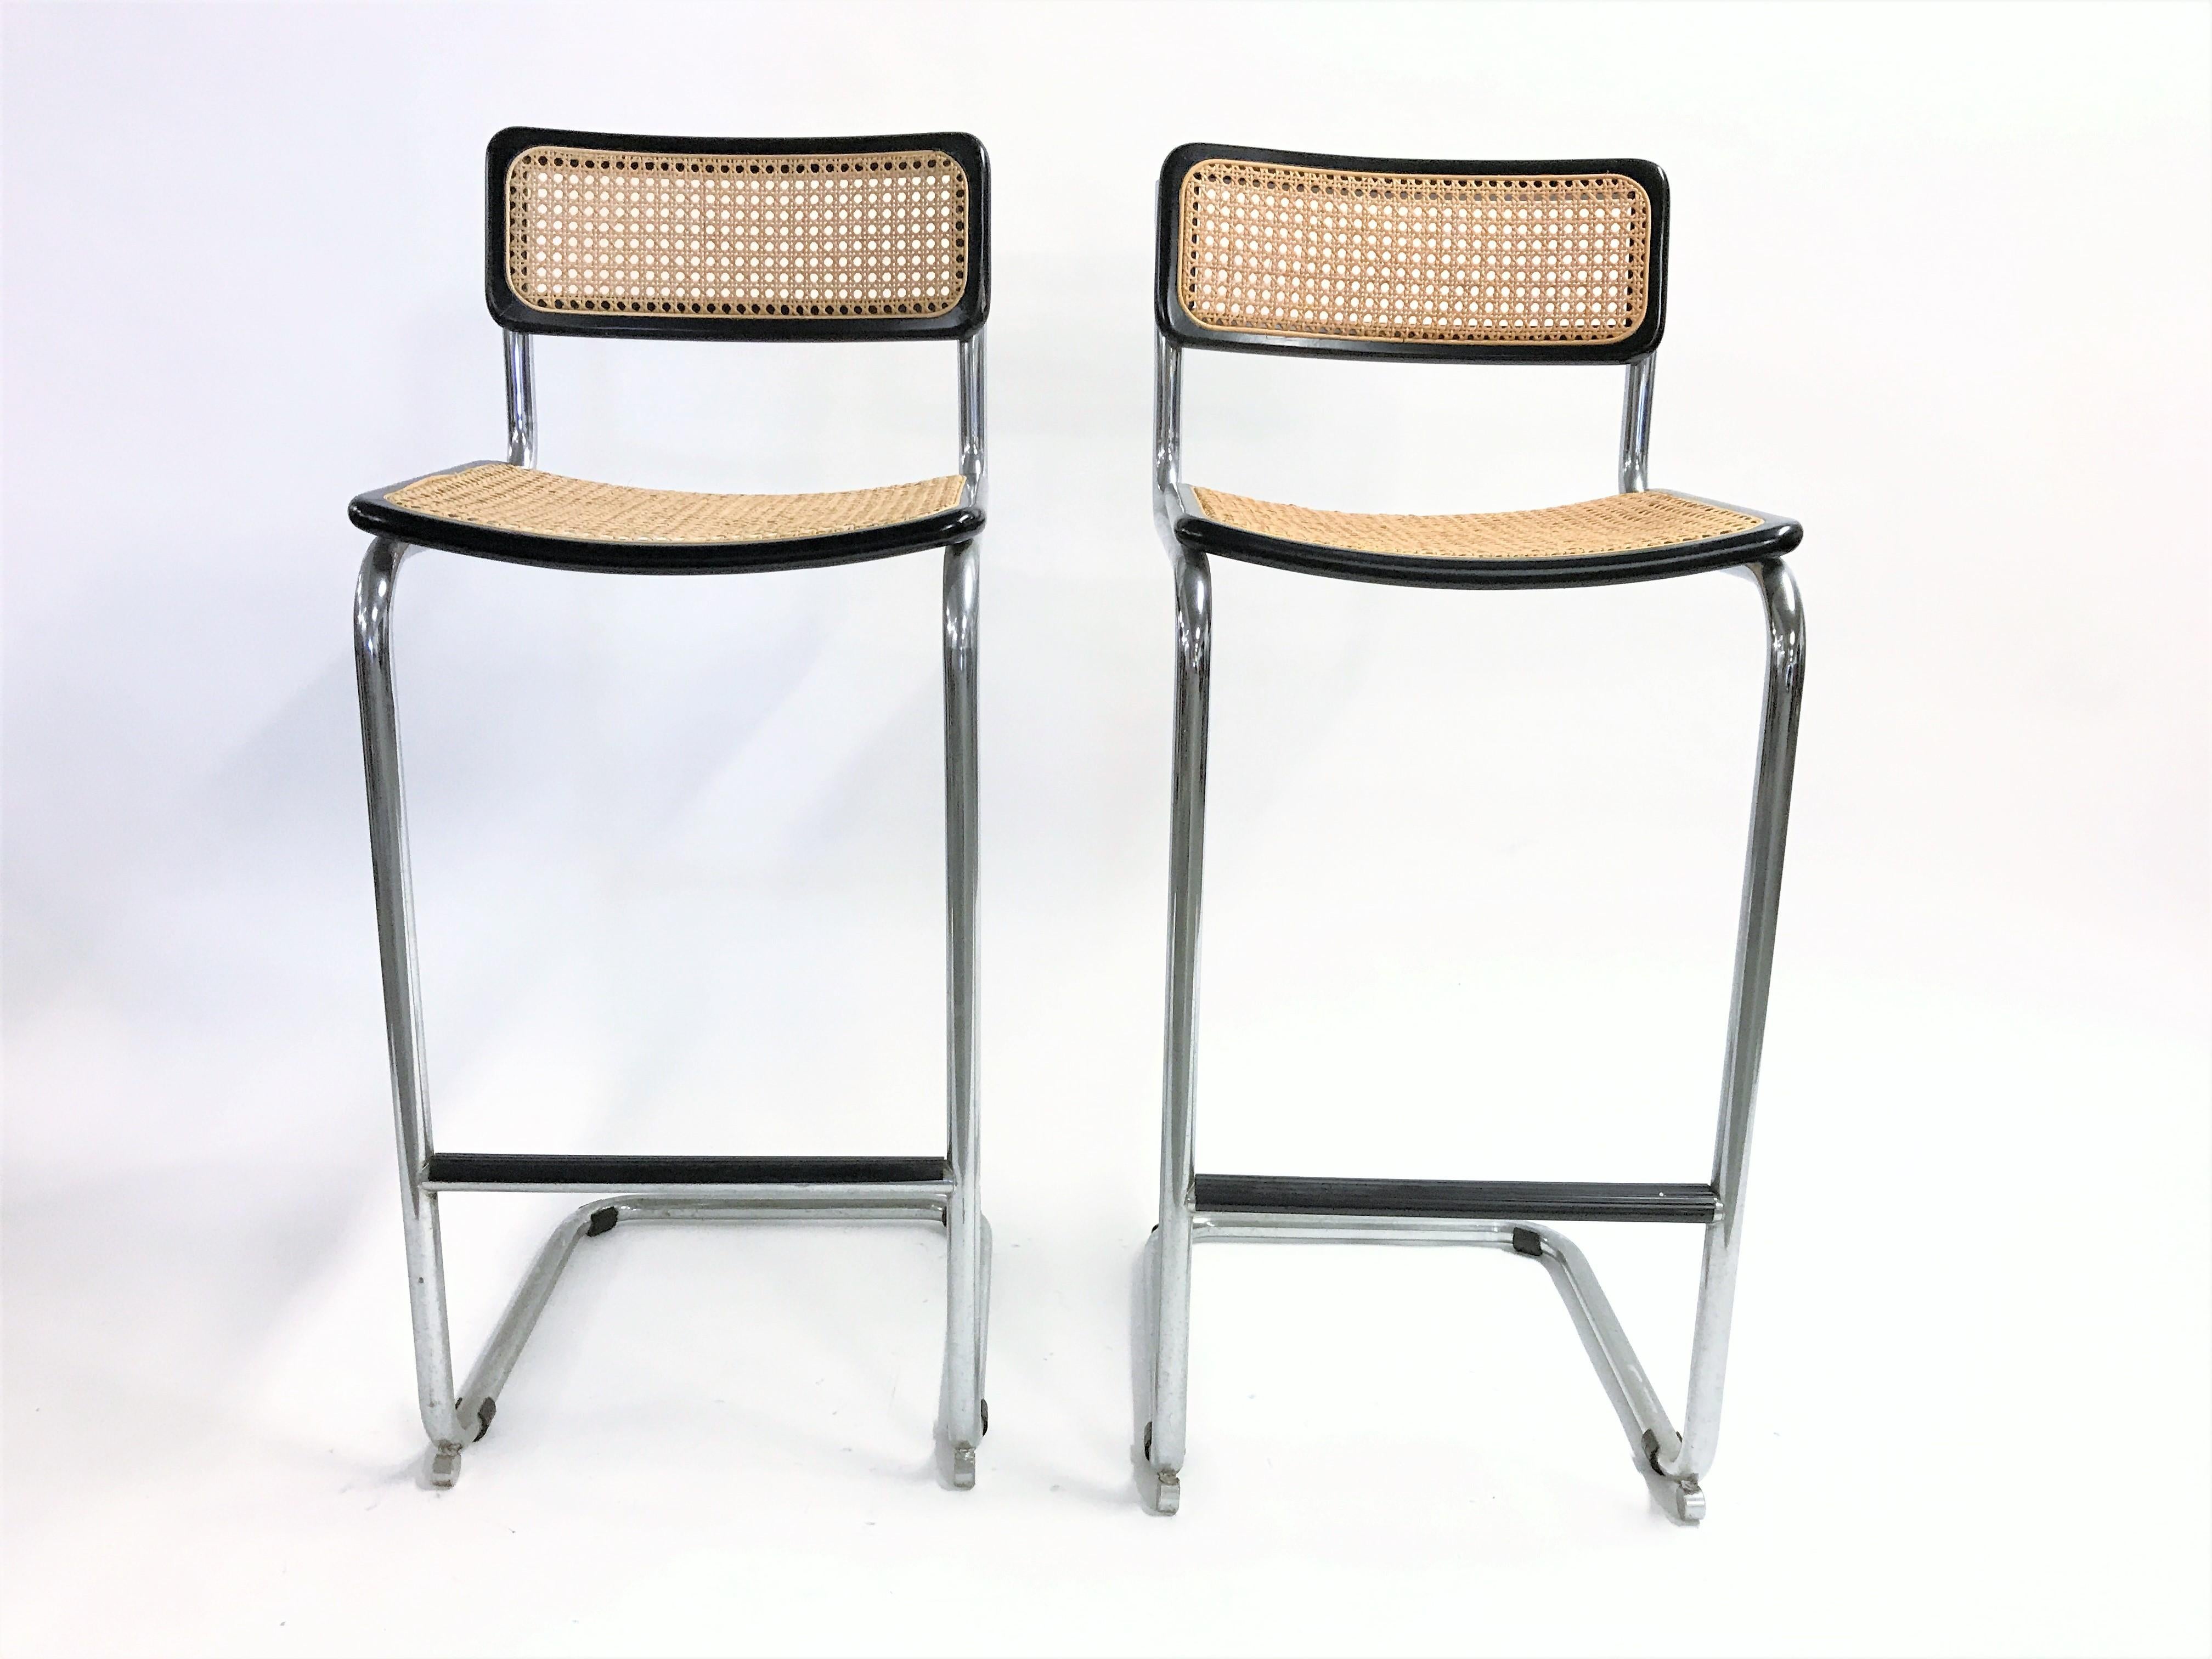 Set of 2 Marcel Breuer Bauhaus design bar stools.

Tubular chrome frame, cane seats and black lacquered wood.

Very good condition.

Dimensions:
Width 43.0 cm
Height 99.0 cm
Depth 34.0 cm
Seat Height 70 cm.

    


Price is for the